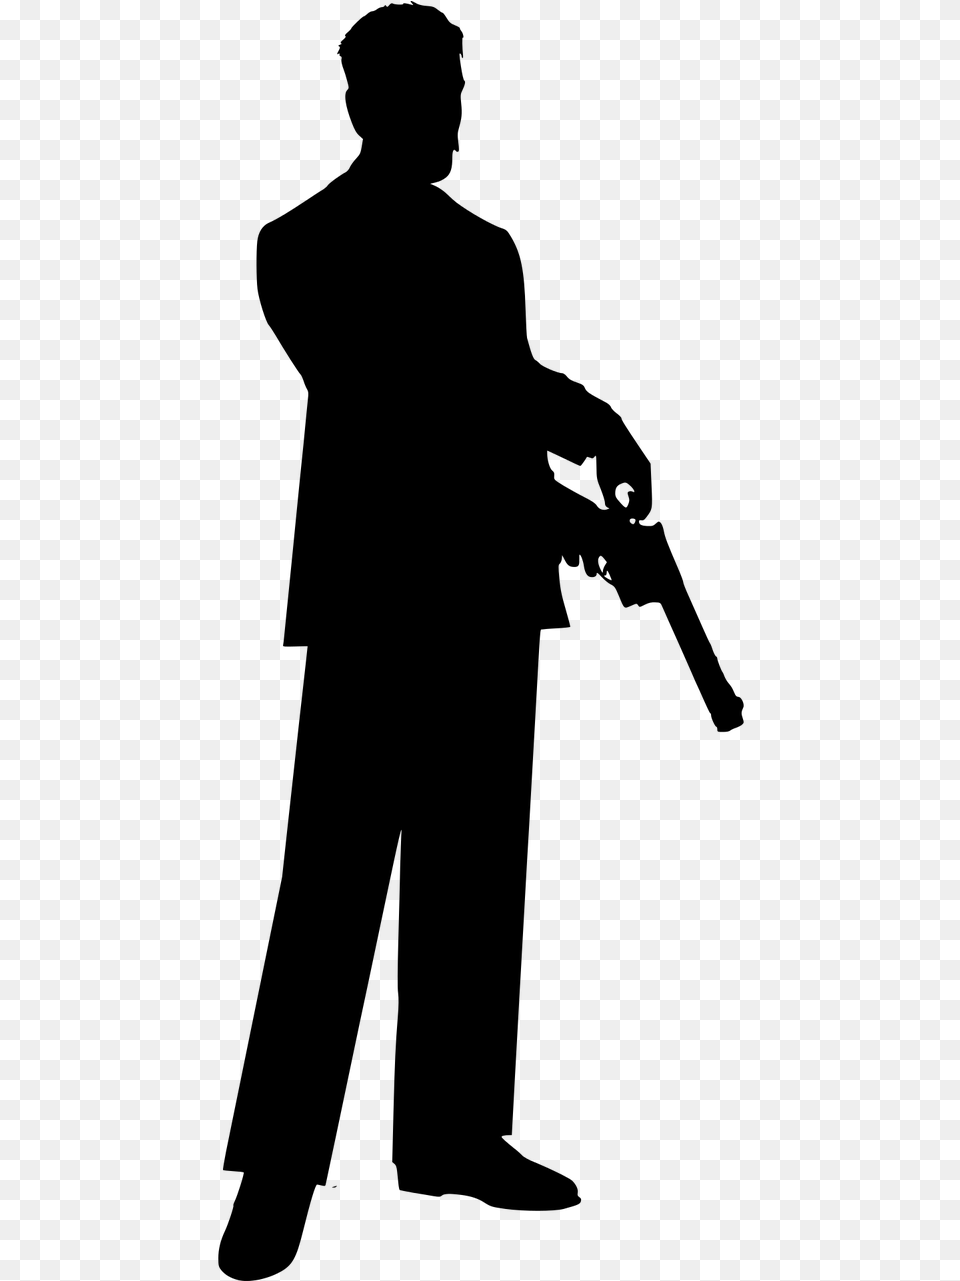 Silhouette Gun Weapon Silhouette Of Man With Gun, Gray Png Image